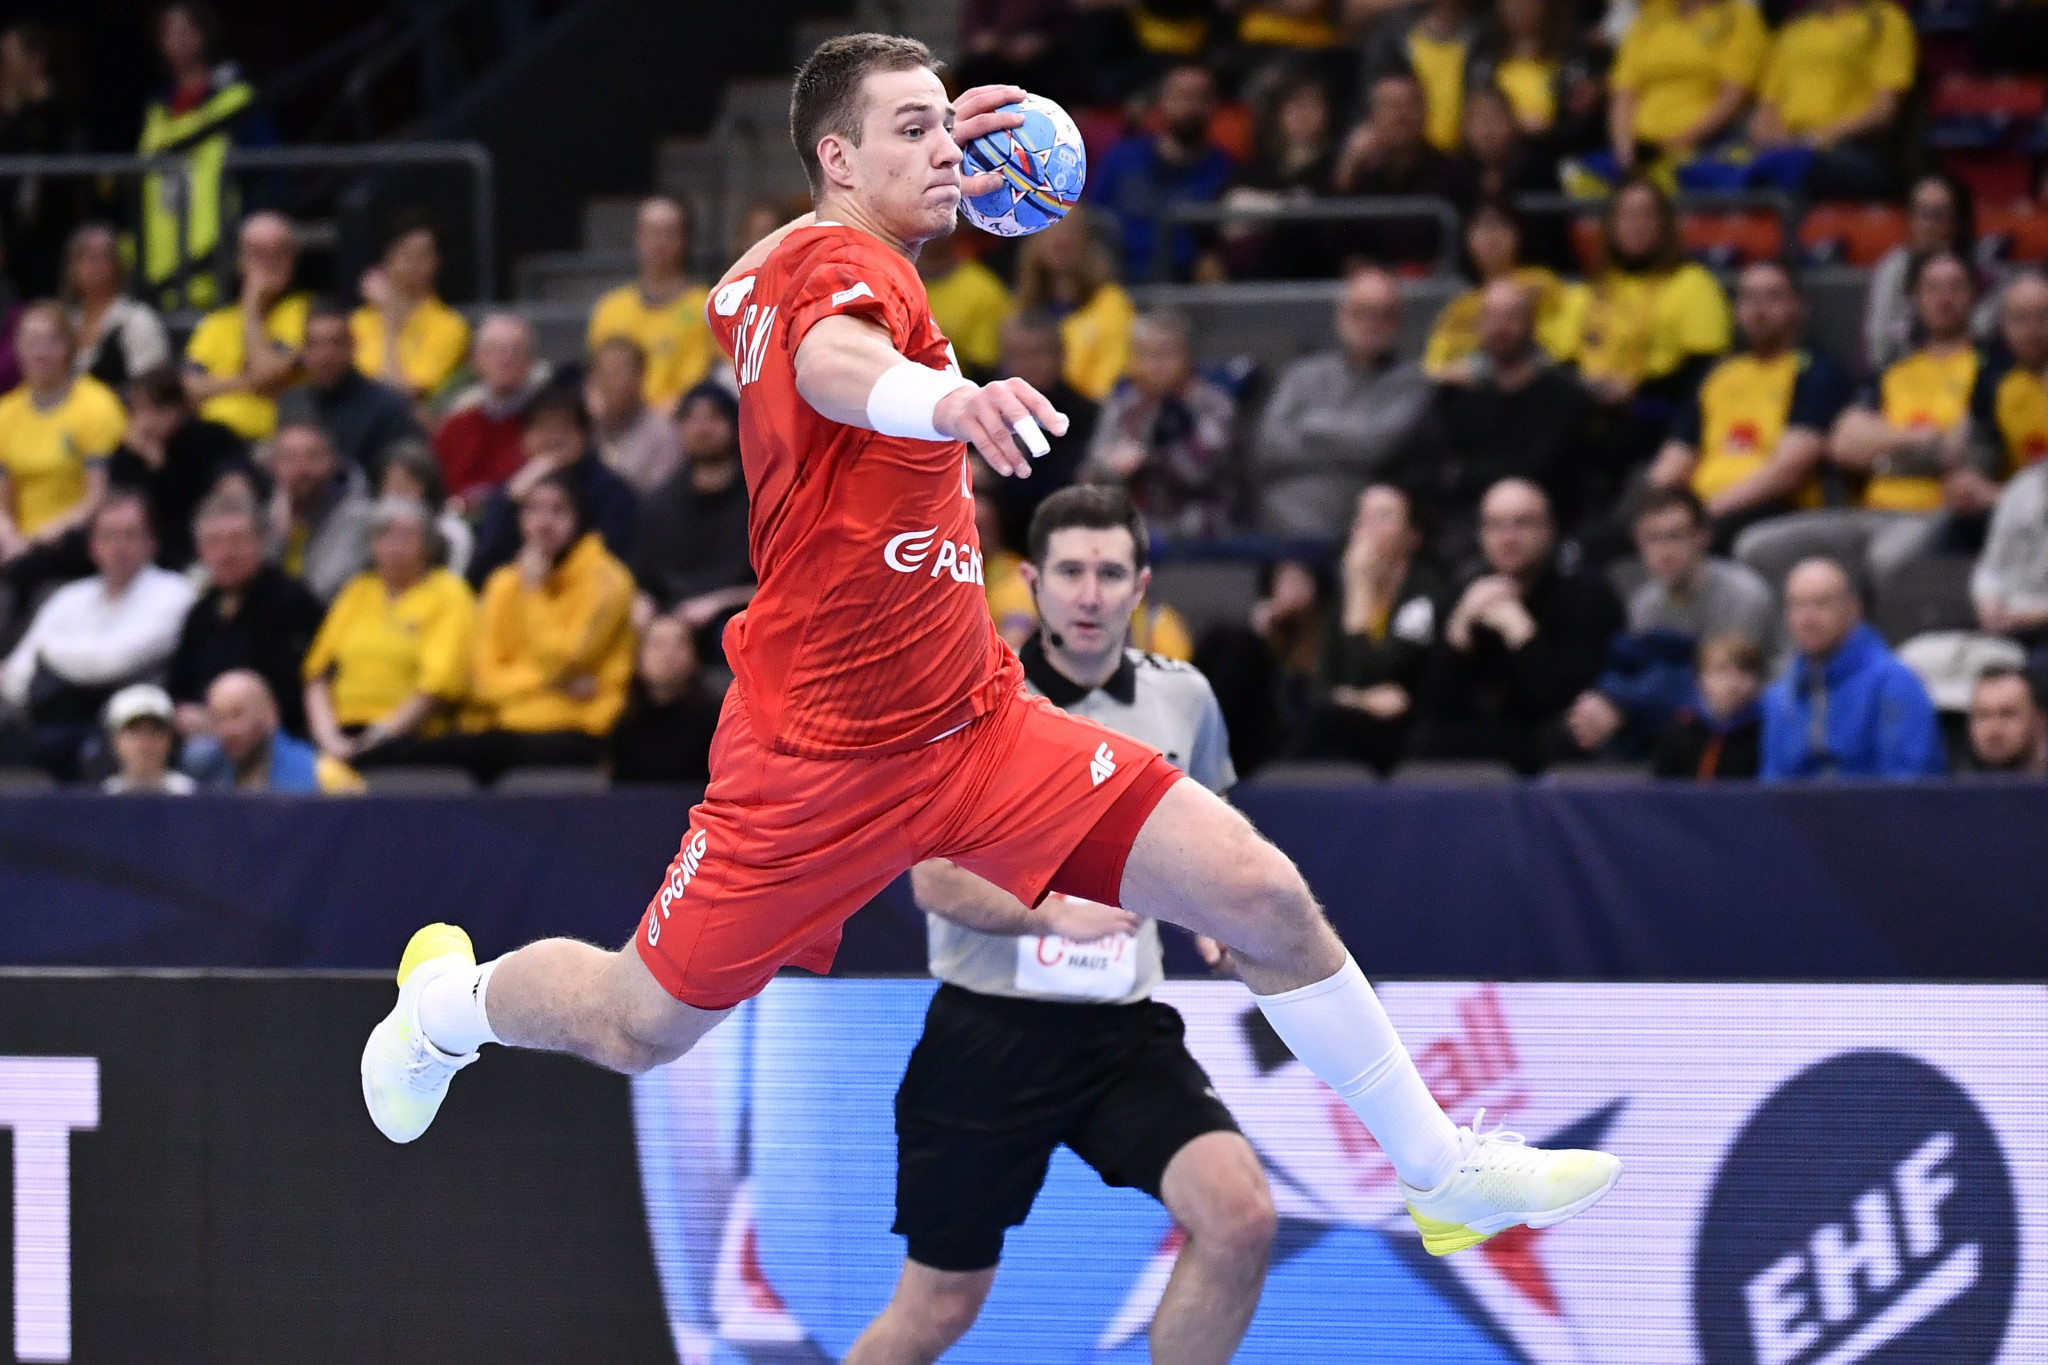 Poland will feature at the 2021 Handball World Championships having missed out on the event in 2019 ©Getty Images